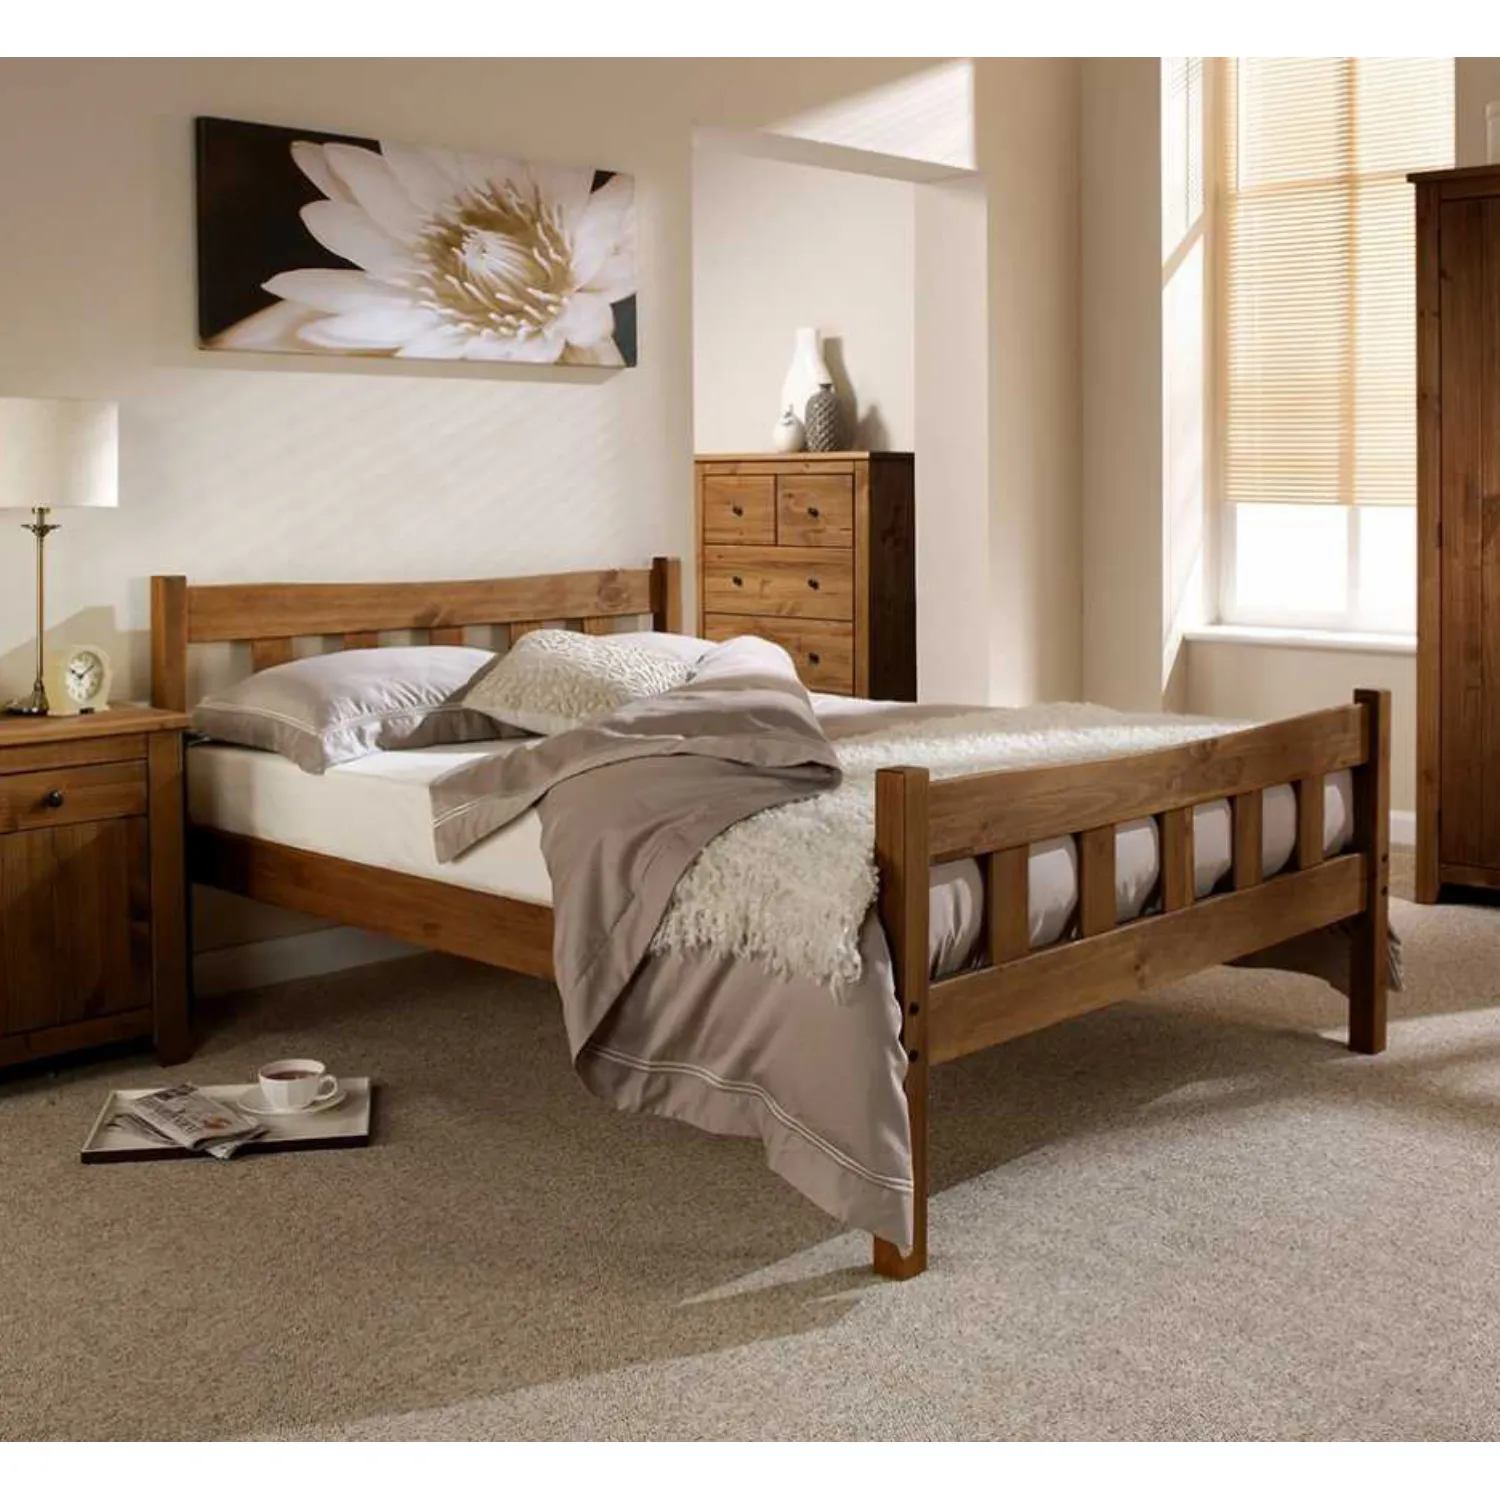 Solid Oak Slatted 5ft King Size Bed with High Foot Board